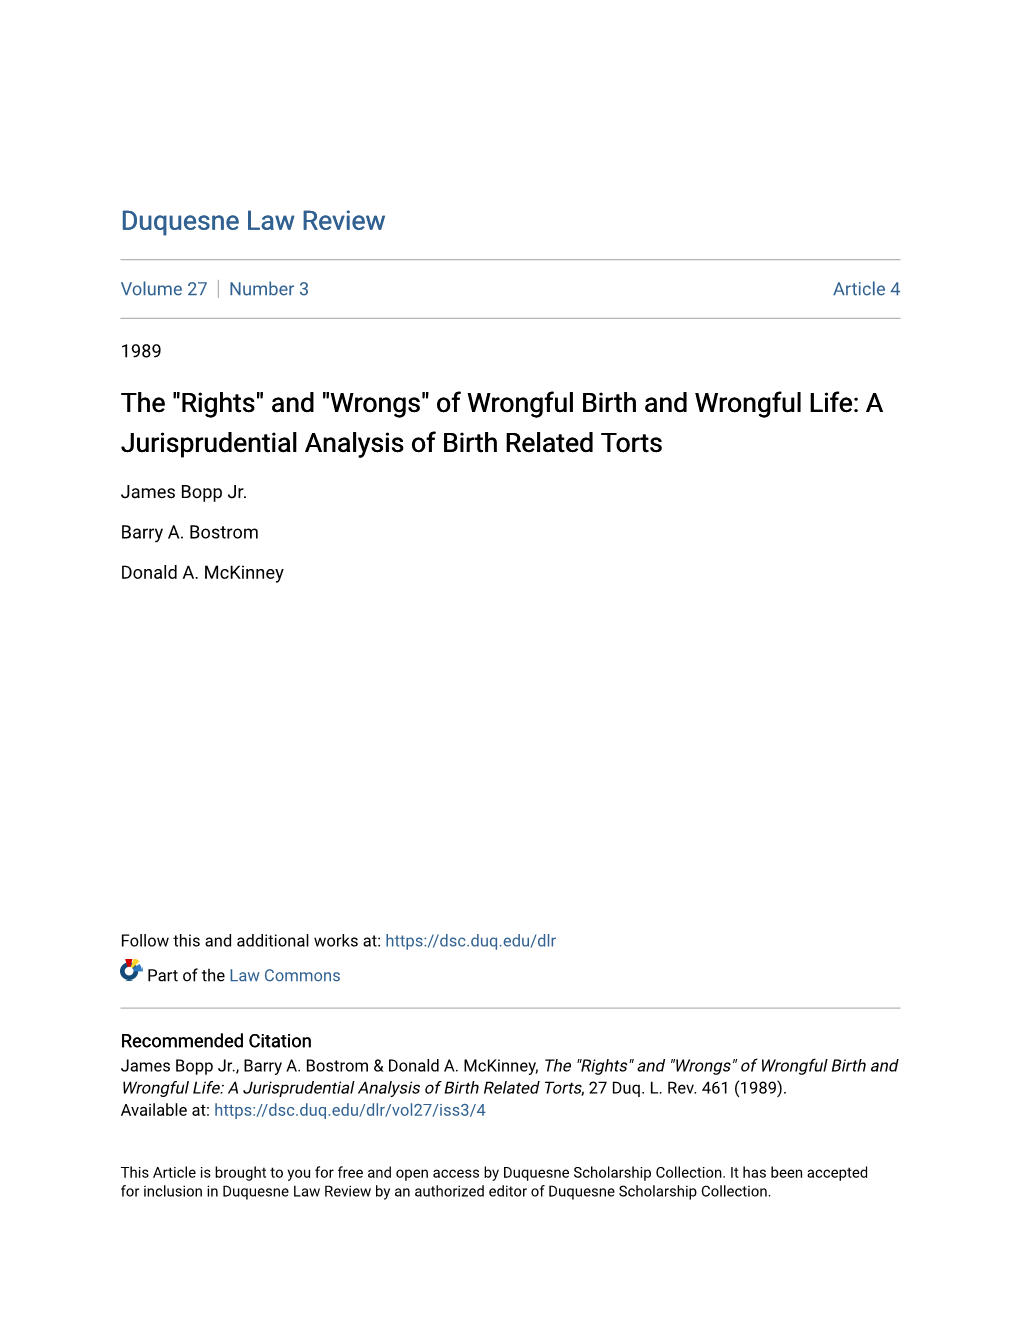 Of Wrongful Birth and Wrongful Life: a Jurisprudential Analysis of Birth Related Torts